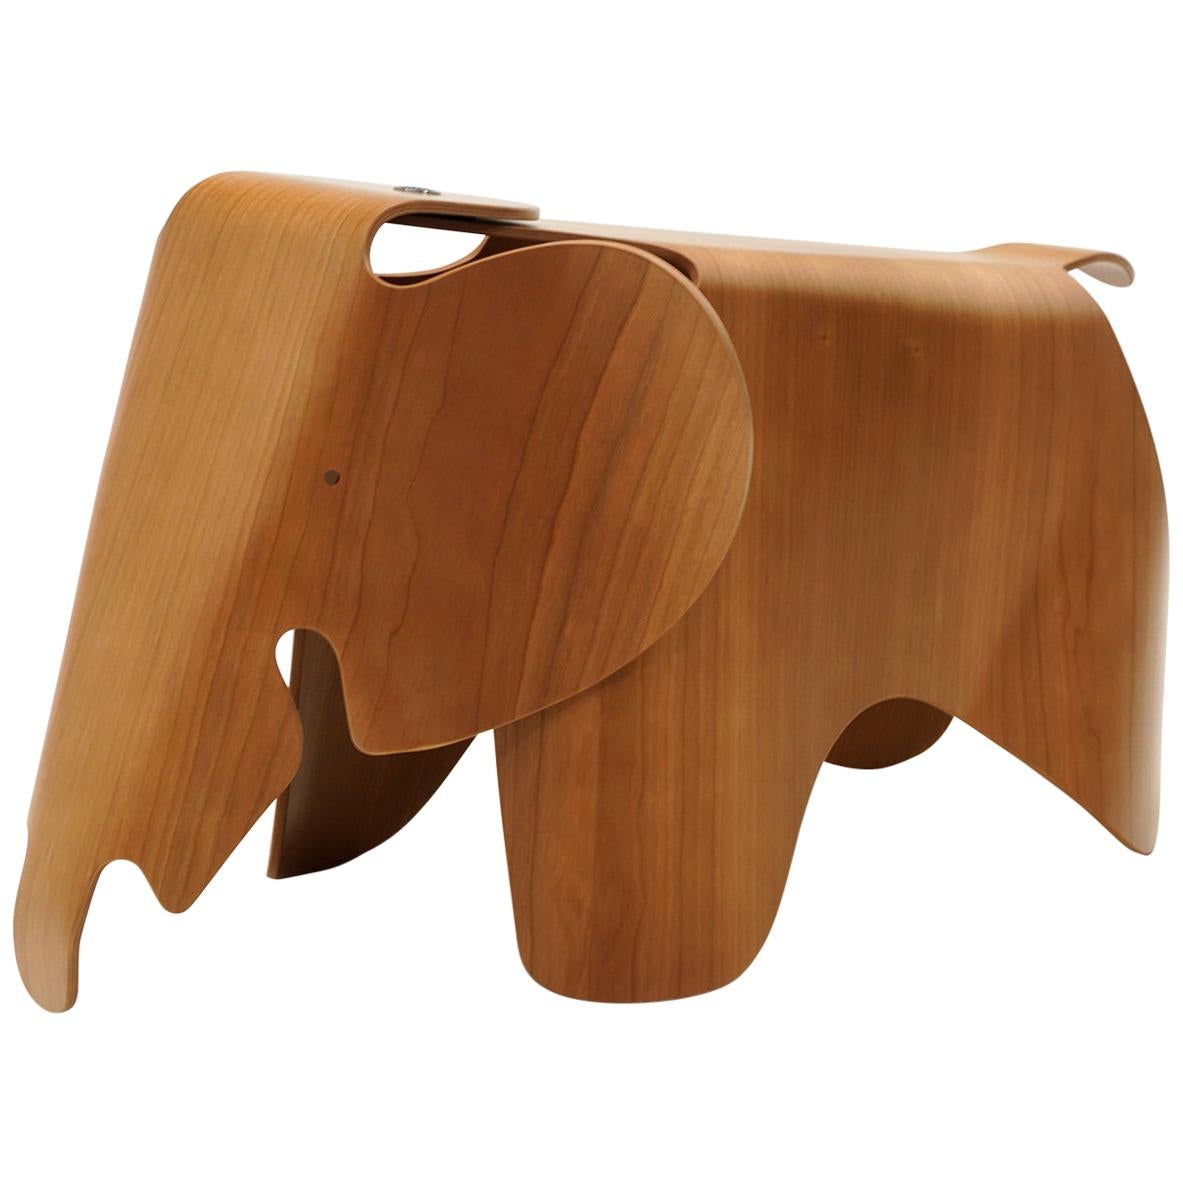 Plywood Elephant by Charles and Ray Eames, New, Only Opened for Photos